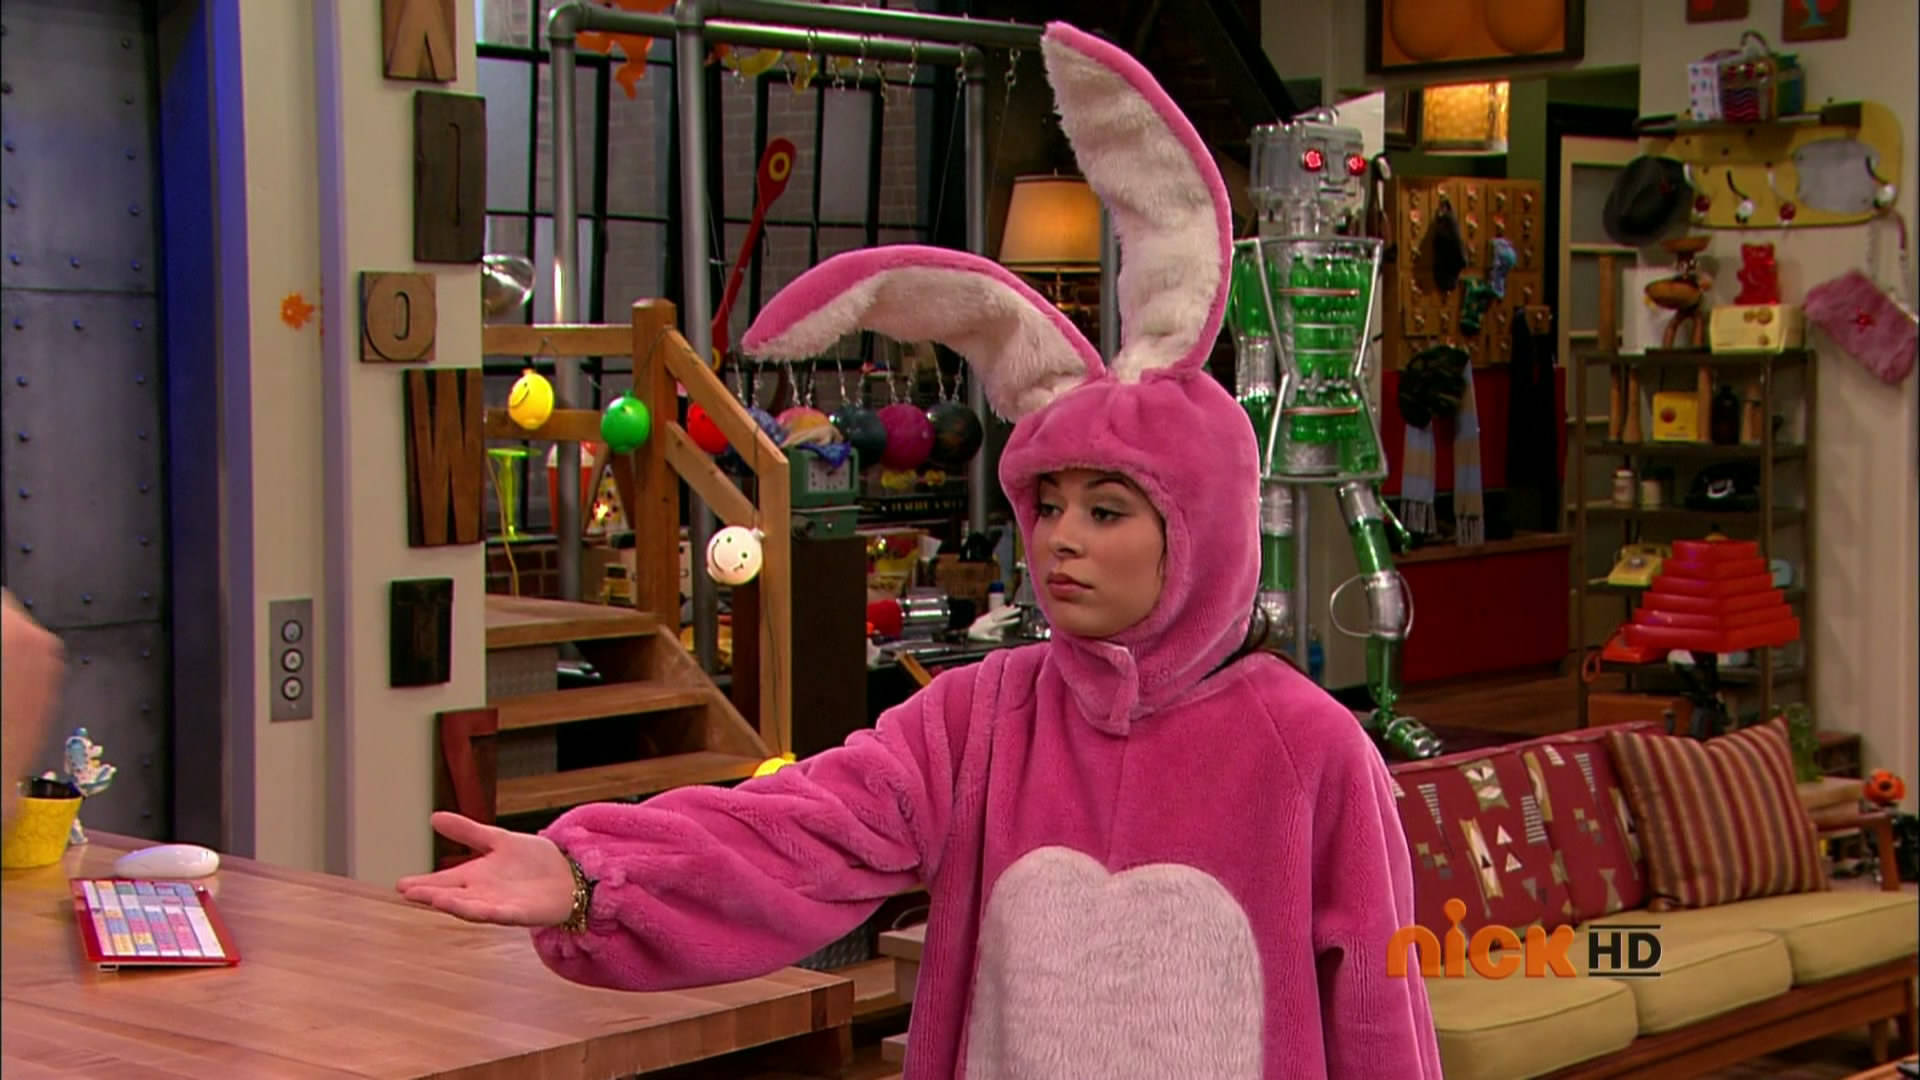 TV Show ICarly 1920x1080